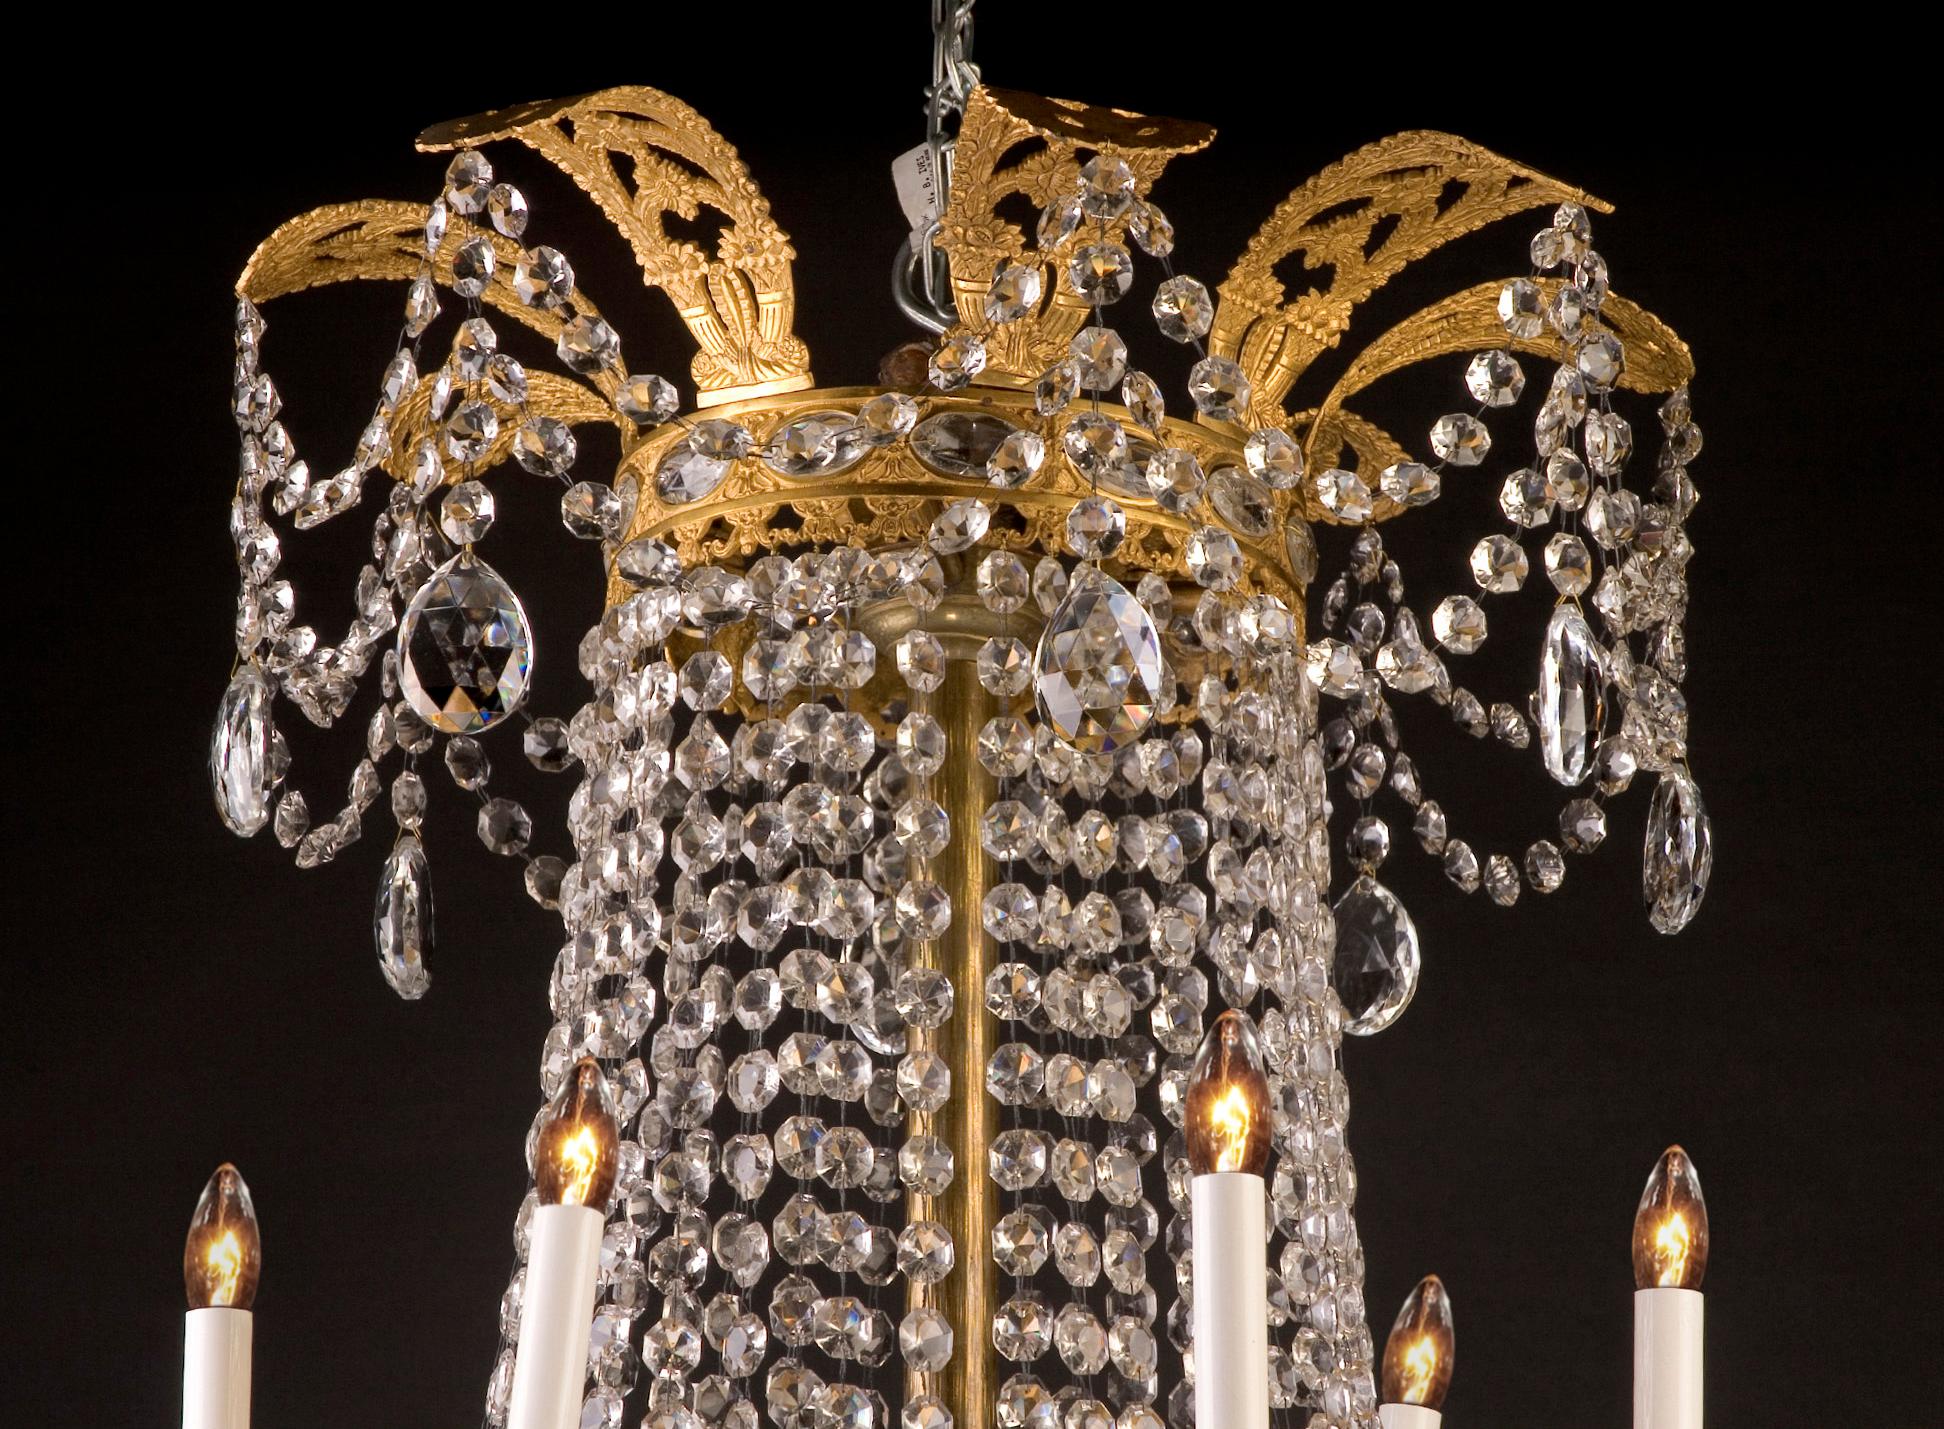 Grand French 19th Century Empire Bronze d’Ore and Crystal Chandelier For Sale 1